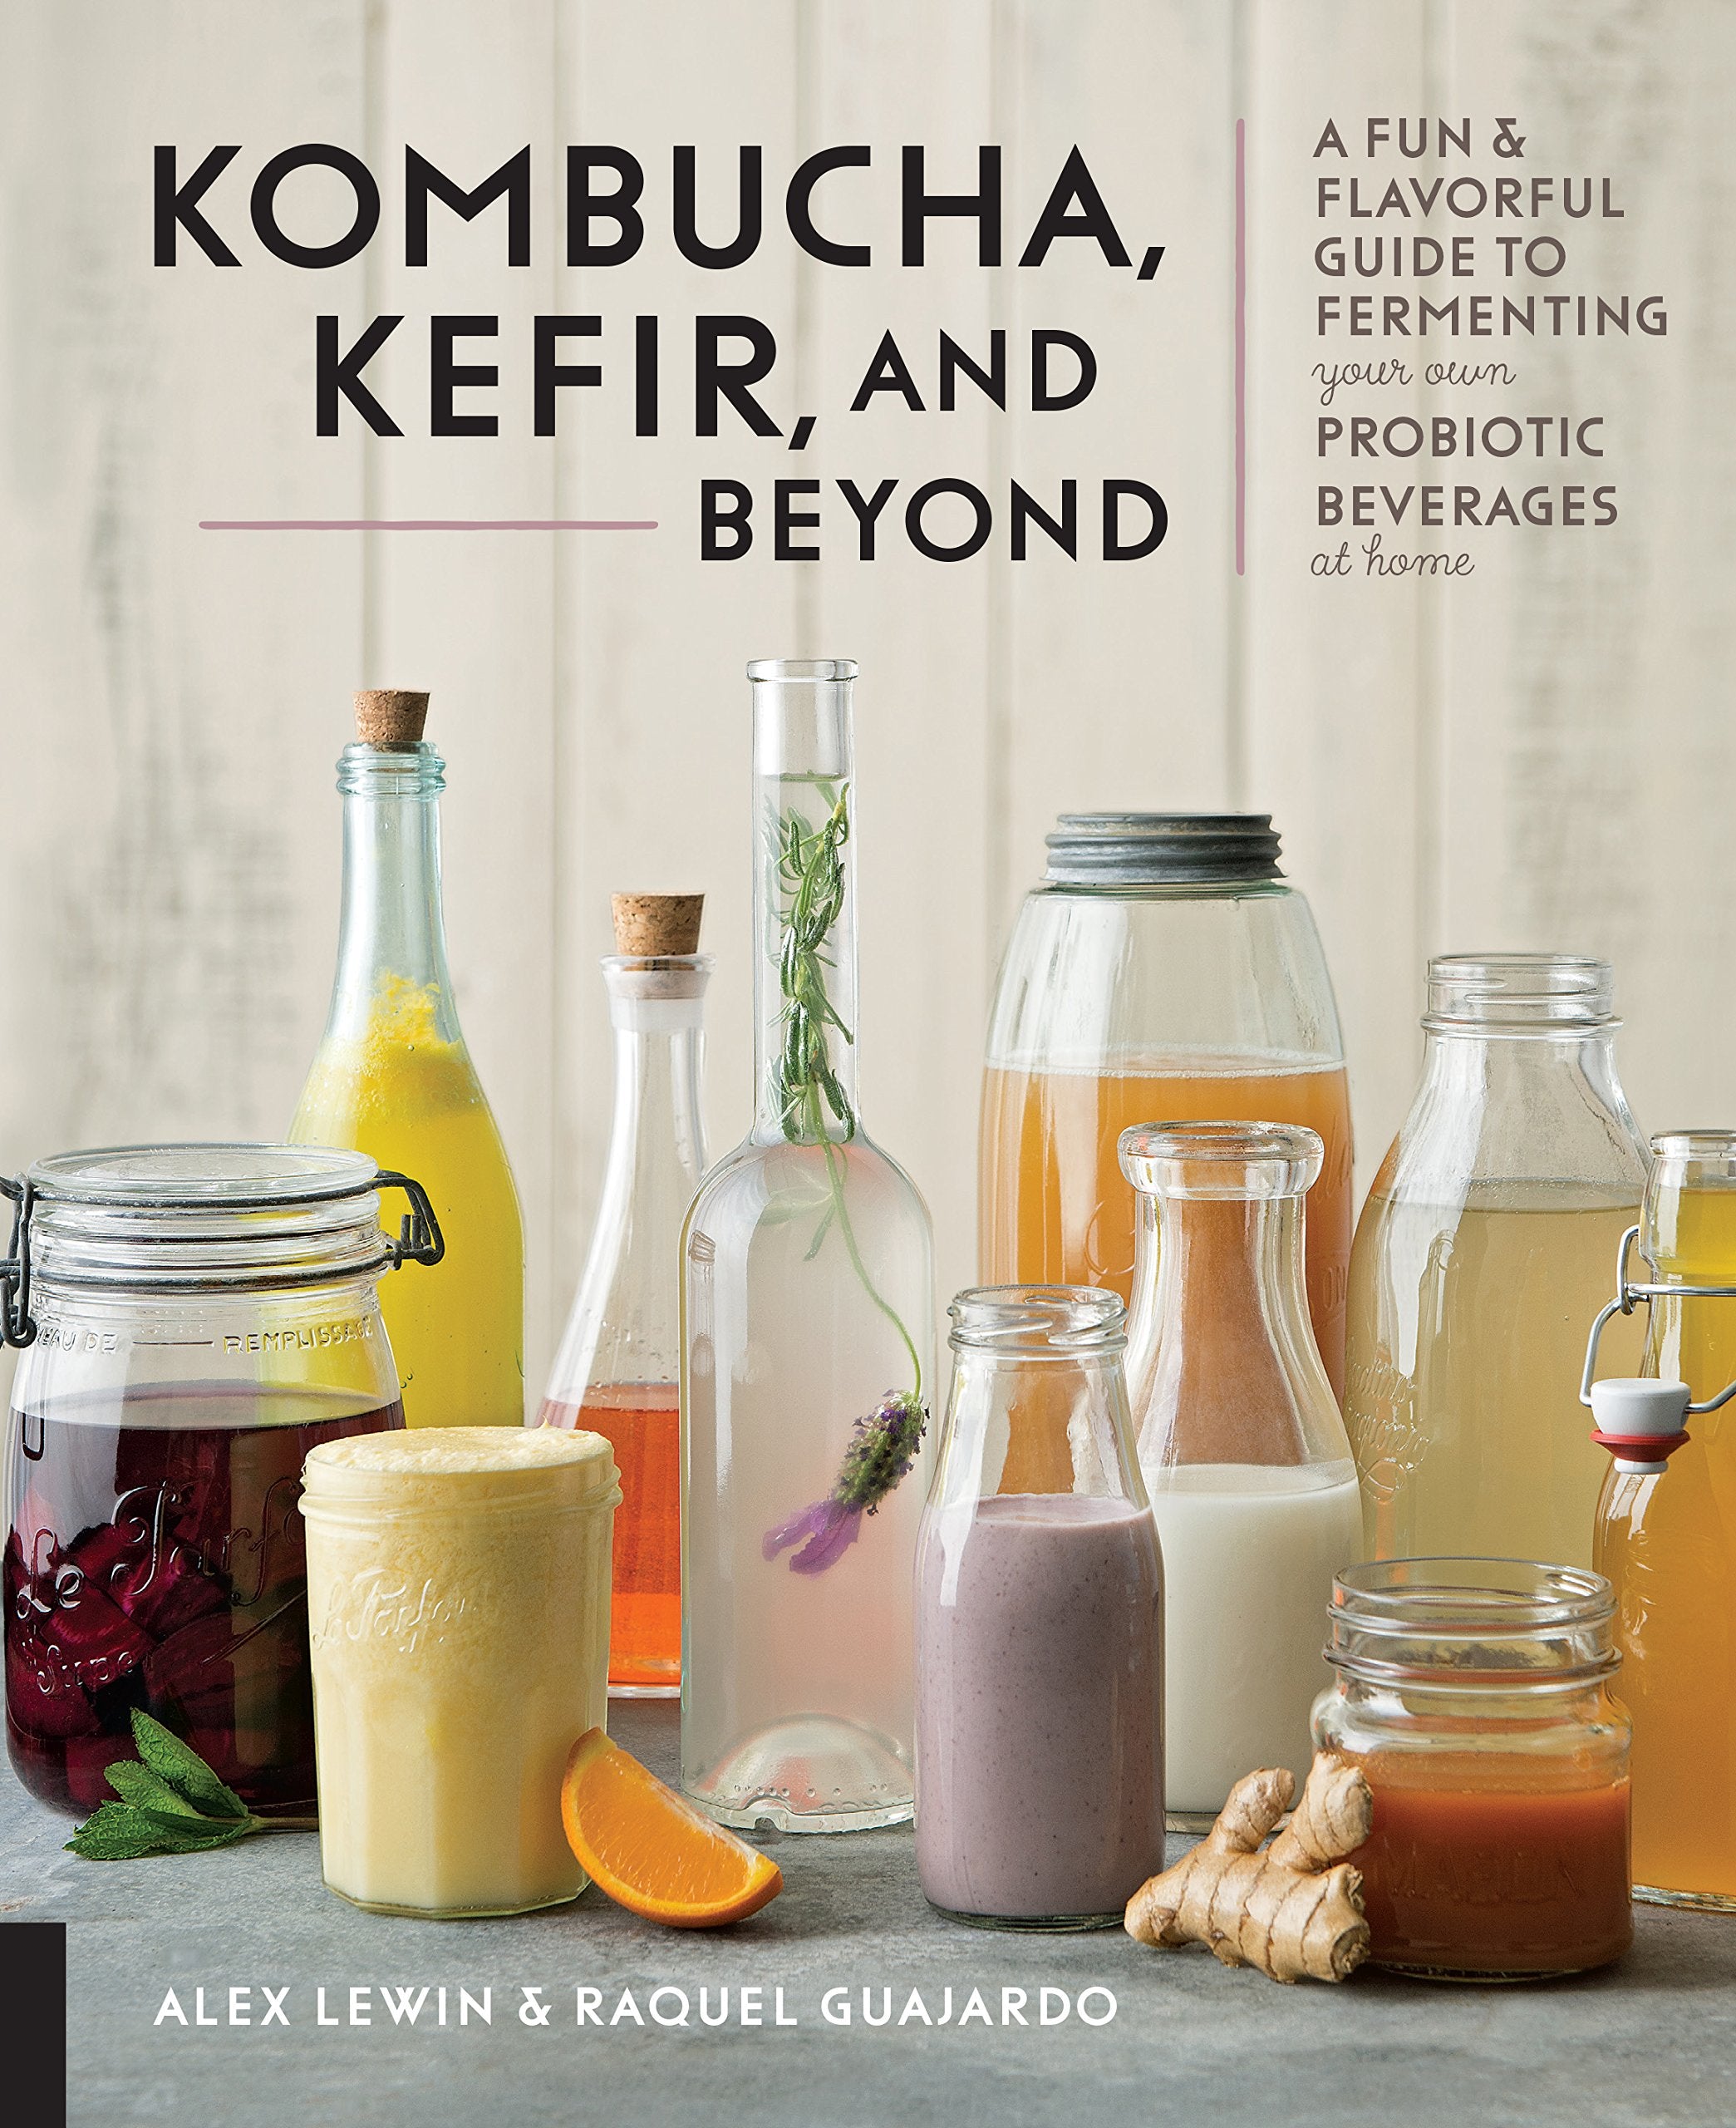 Kombucha, Kefir, and Beyond: A Fun and Flavorful Guide to Fermenting Your Own Probiotic Beverages at Home (Alex Lewin, Raquel Guajardo)